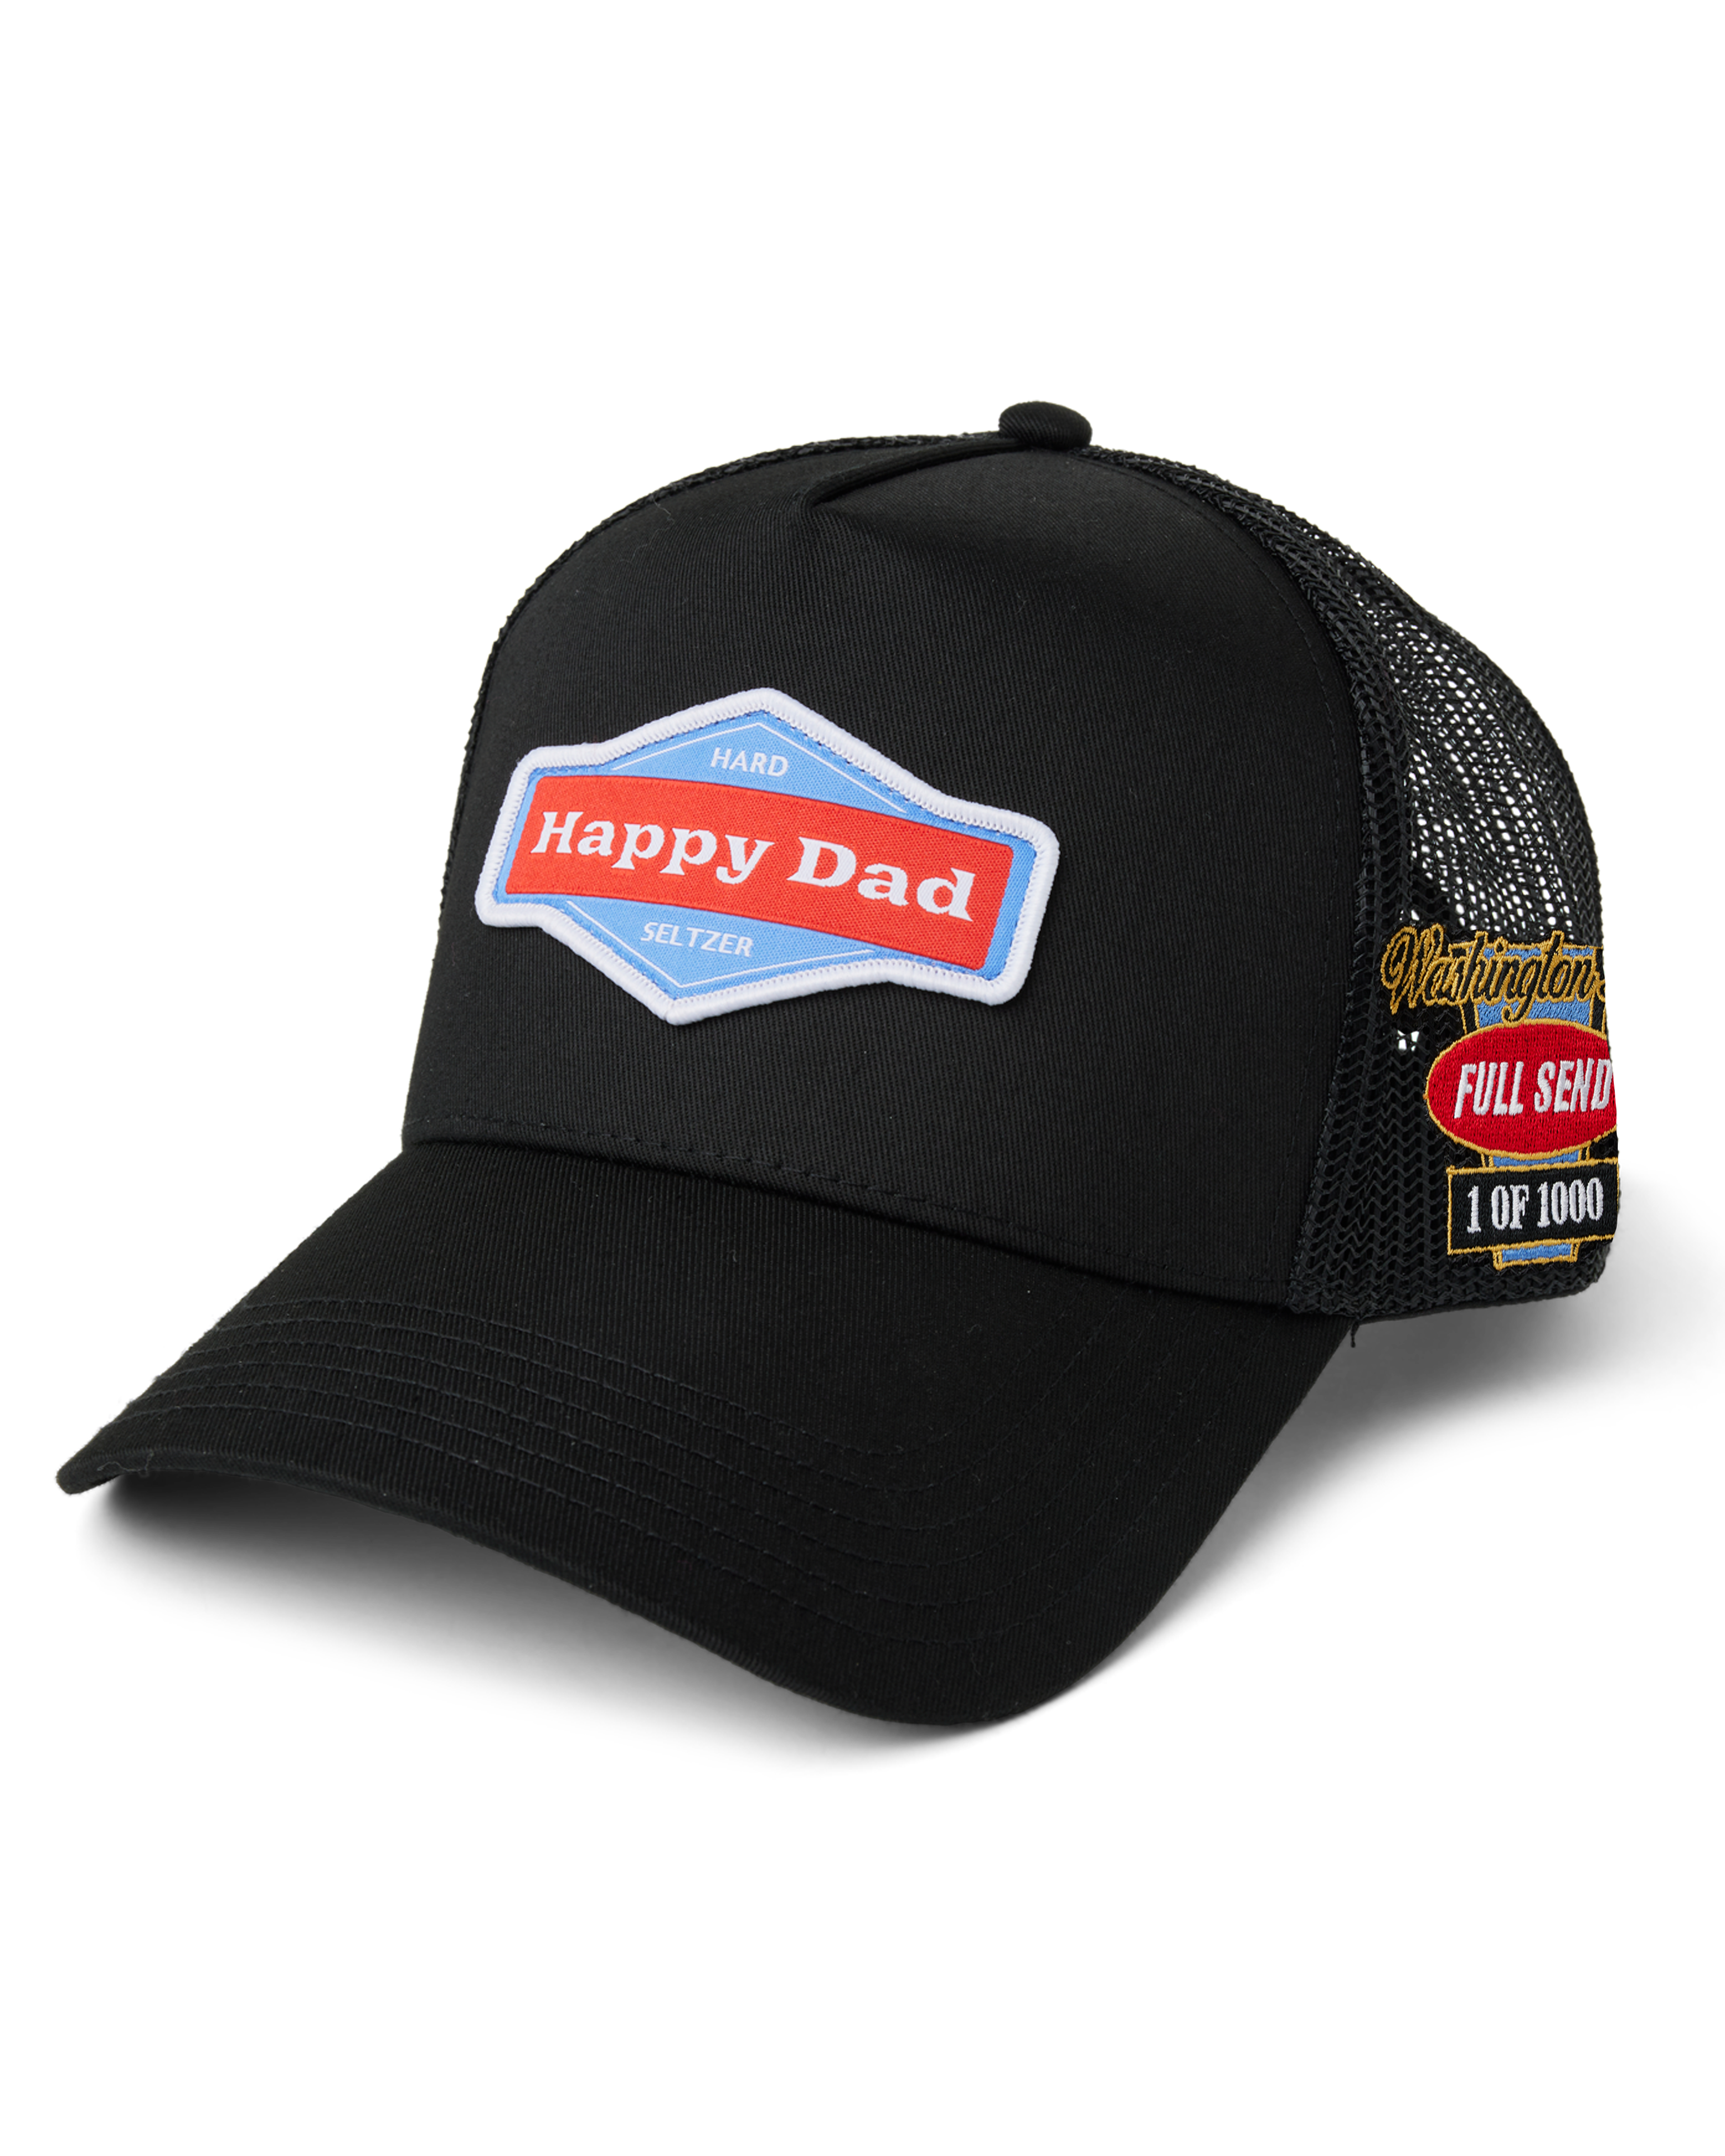 (Limited) Washington D.C. - Happy Dad State Trucker Hat 1 of 1000